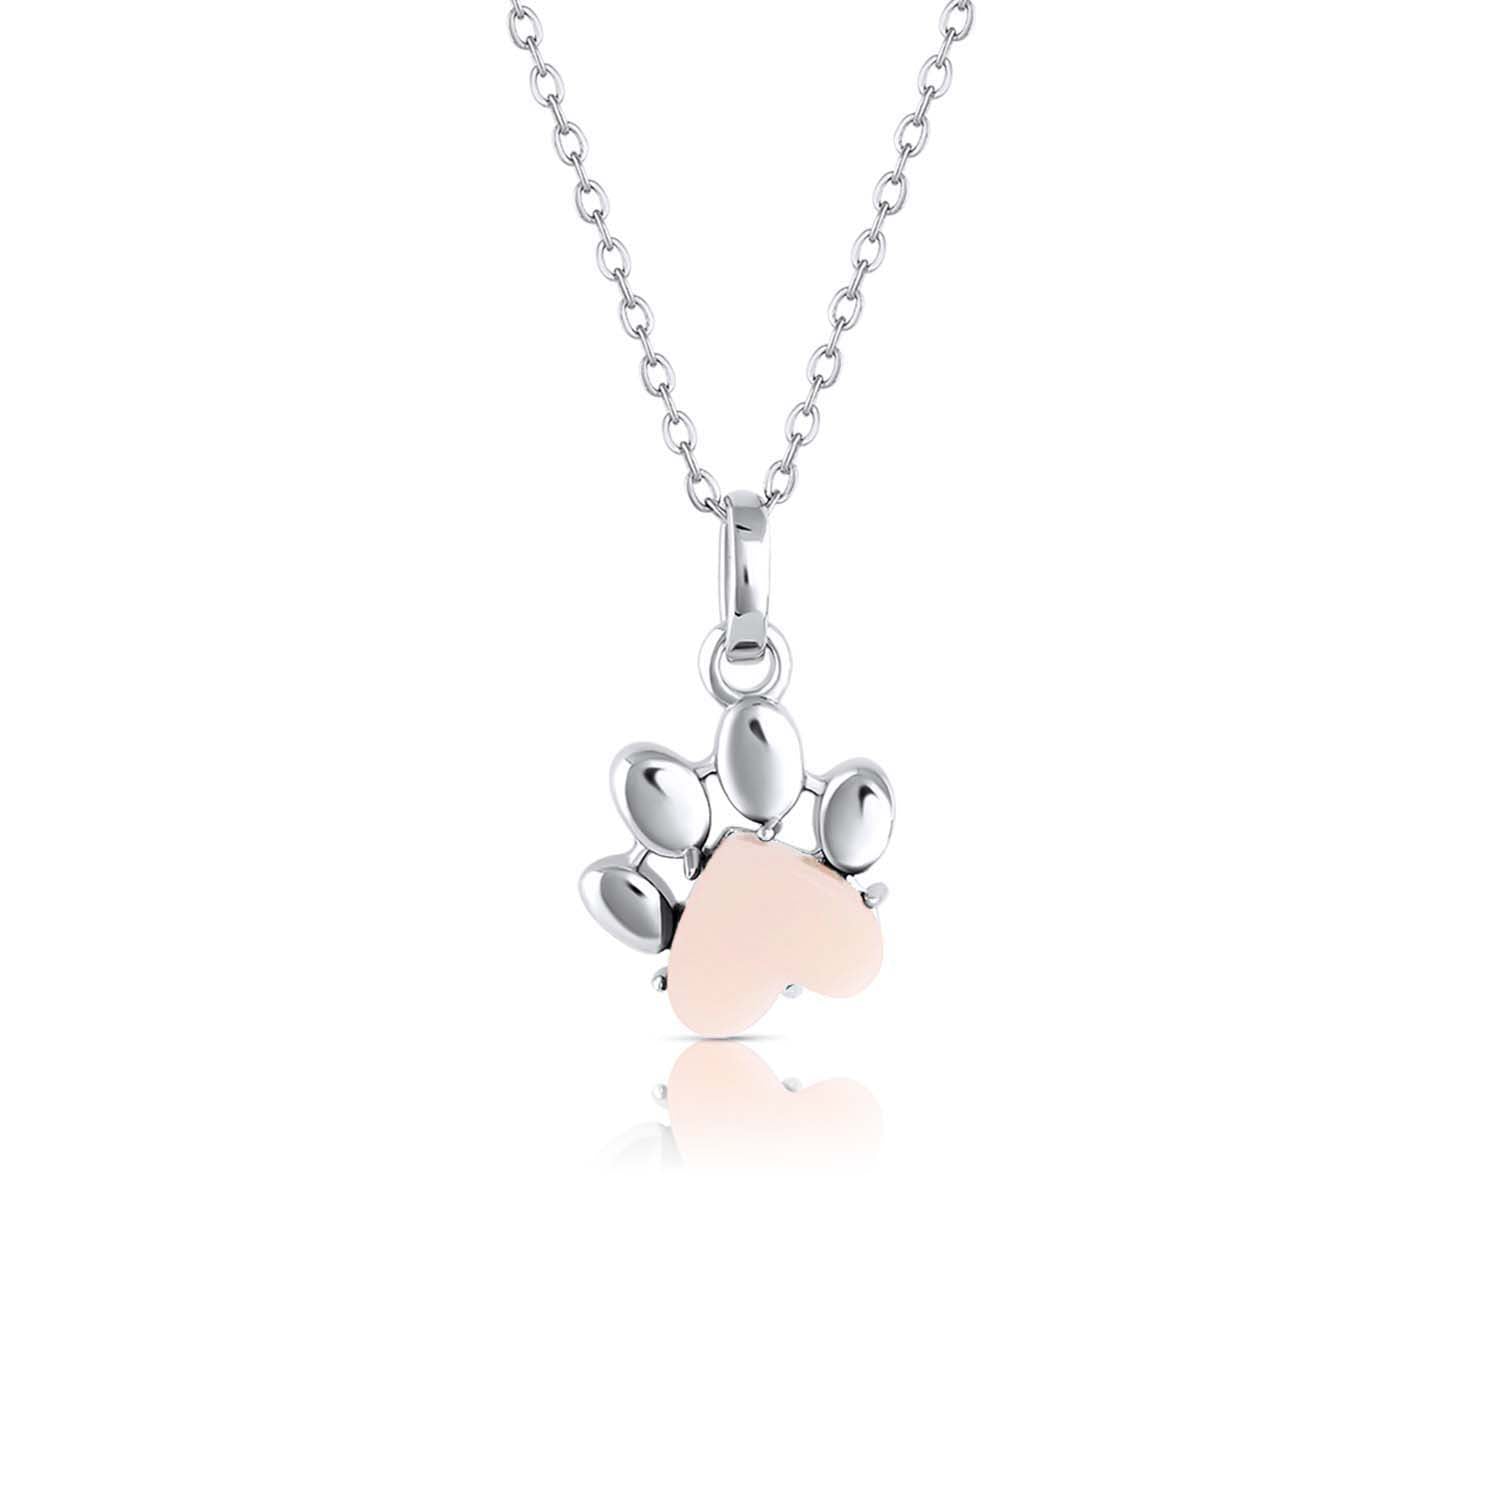 Pet Paw Charm Necklace in Mother-of-pearl. Best gift for pet moms and pet lovers. Made by Born to Rock Jewelry